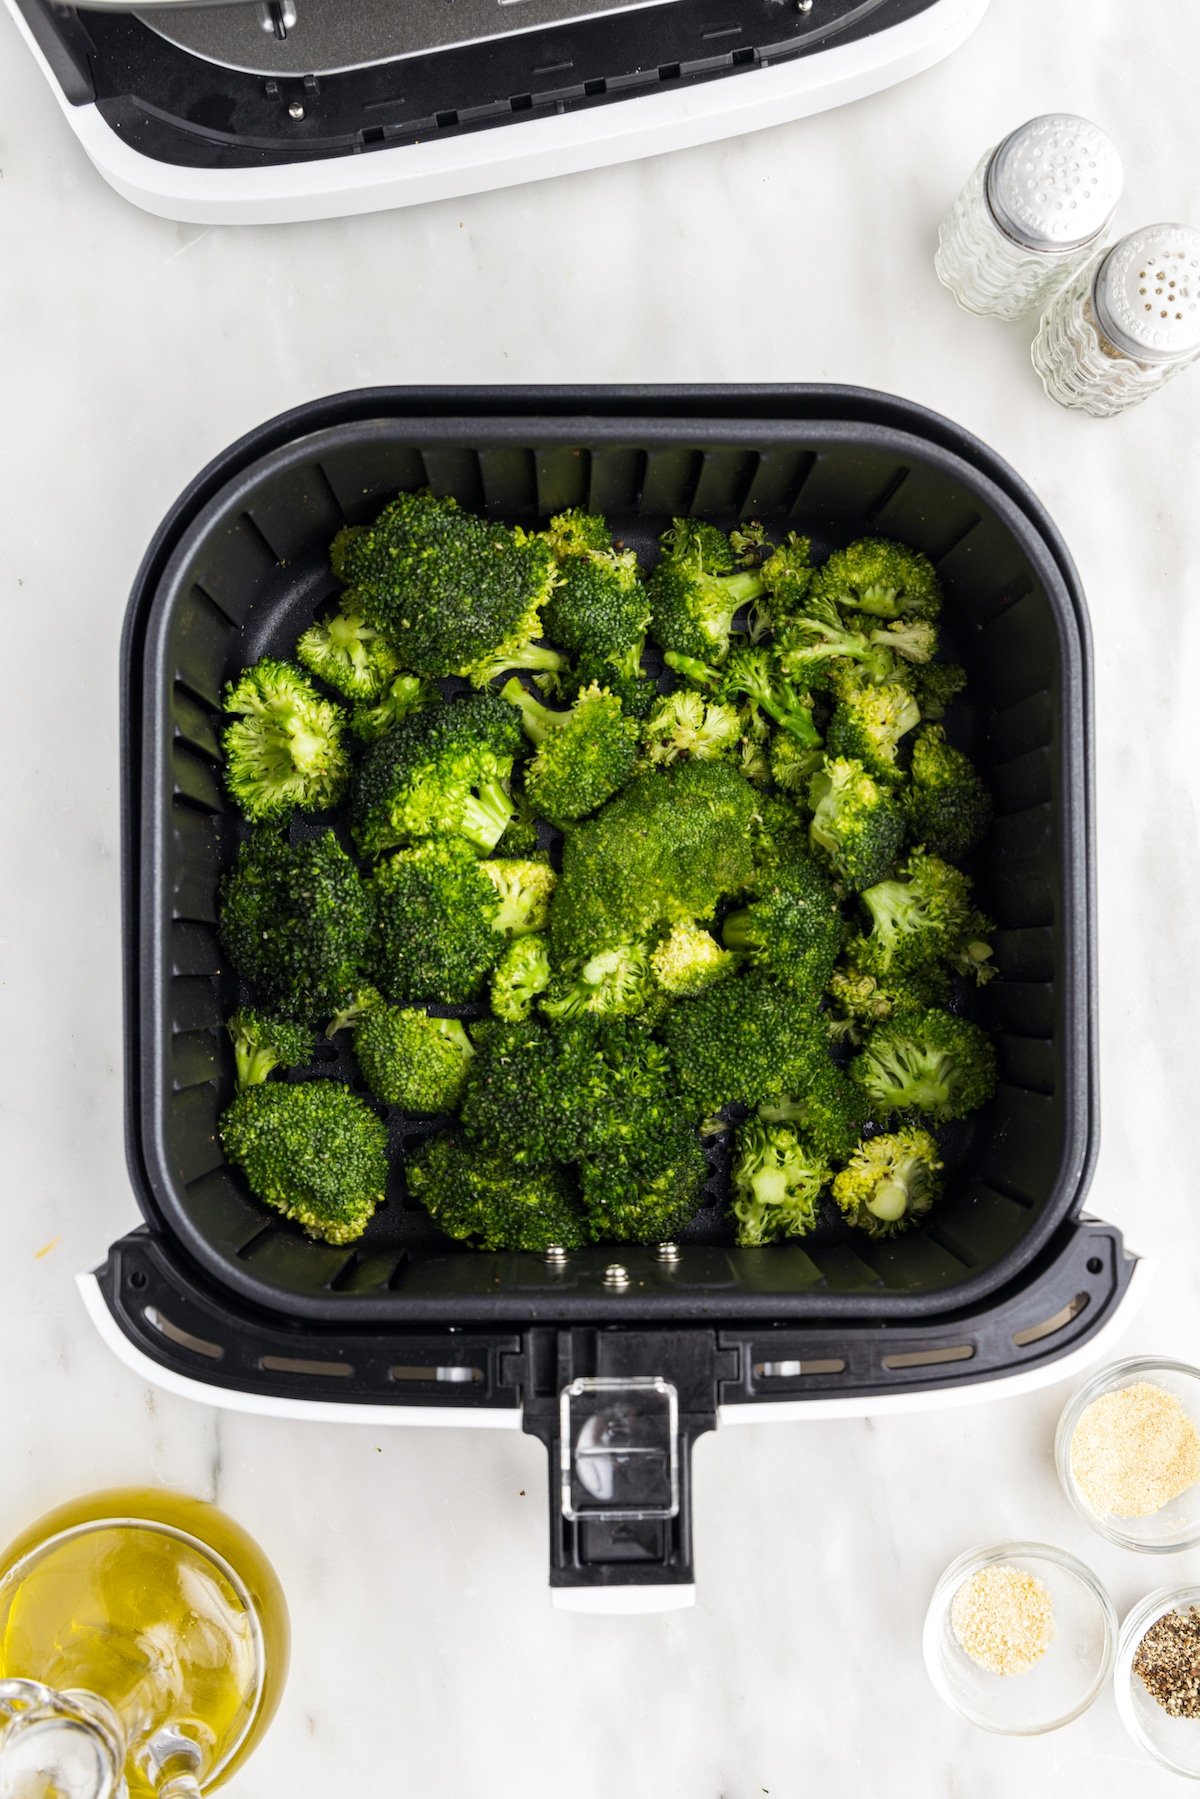 Overhead shot of broccoli inside the air fryer tray before cooking